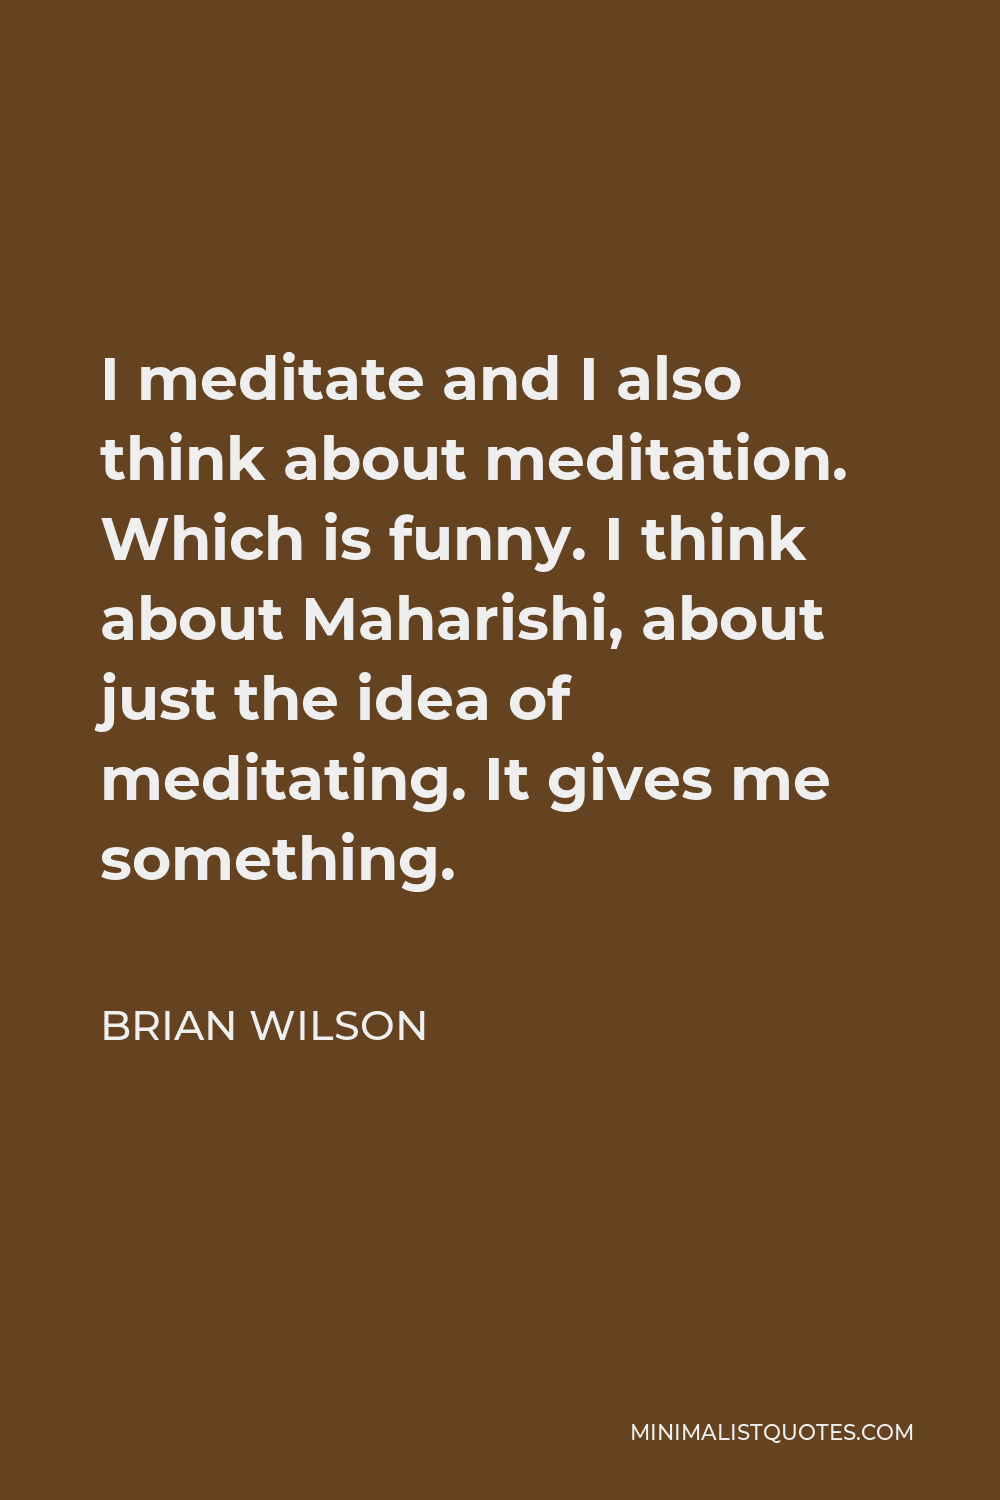 Brian Wilson Quote - I meditate and I also think about meditation. Which is funny. I think about Maharishi, about just the idea of meditating. It gives me something.